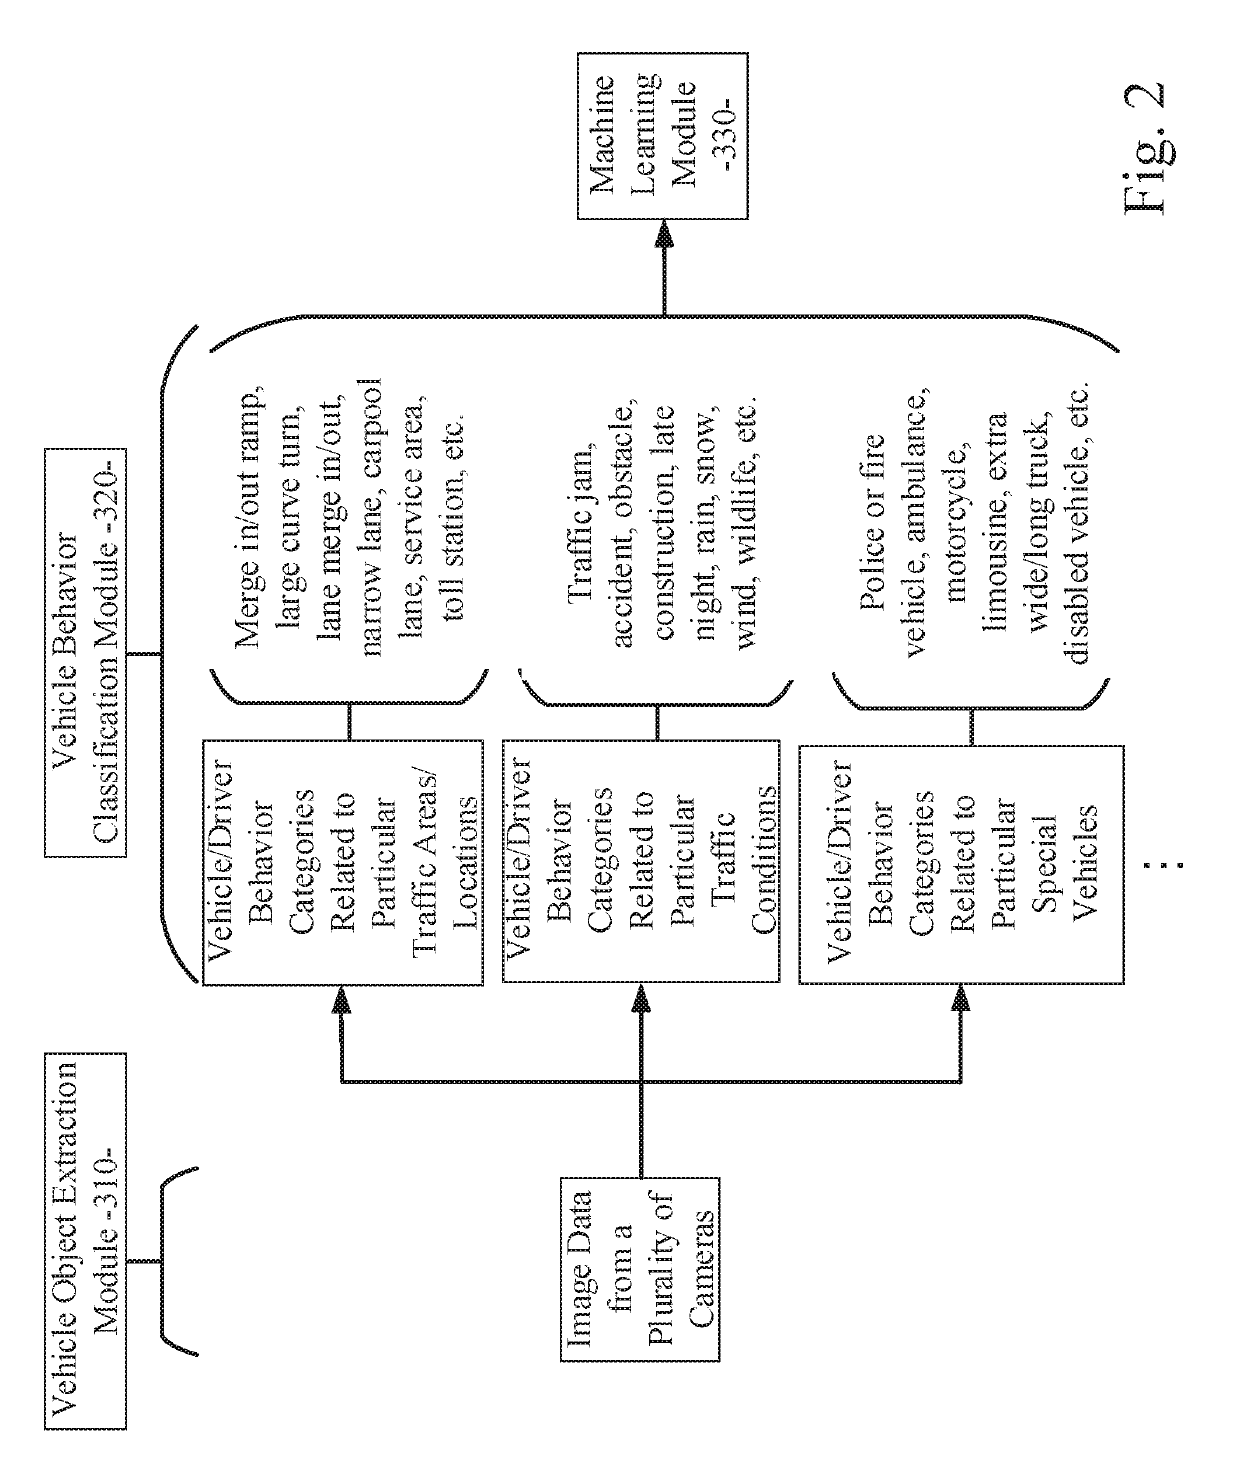 Human driving behavior modeling system using machine learning